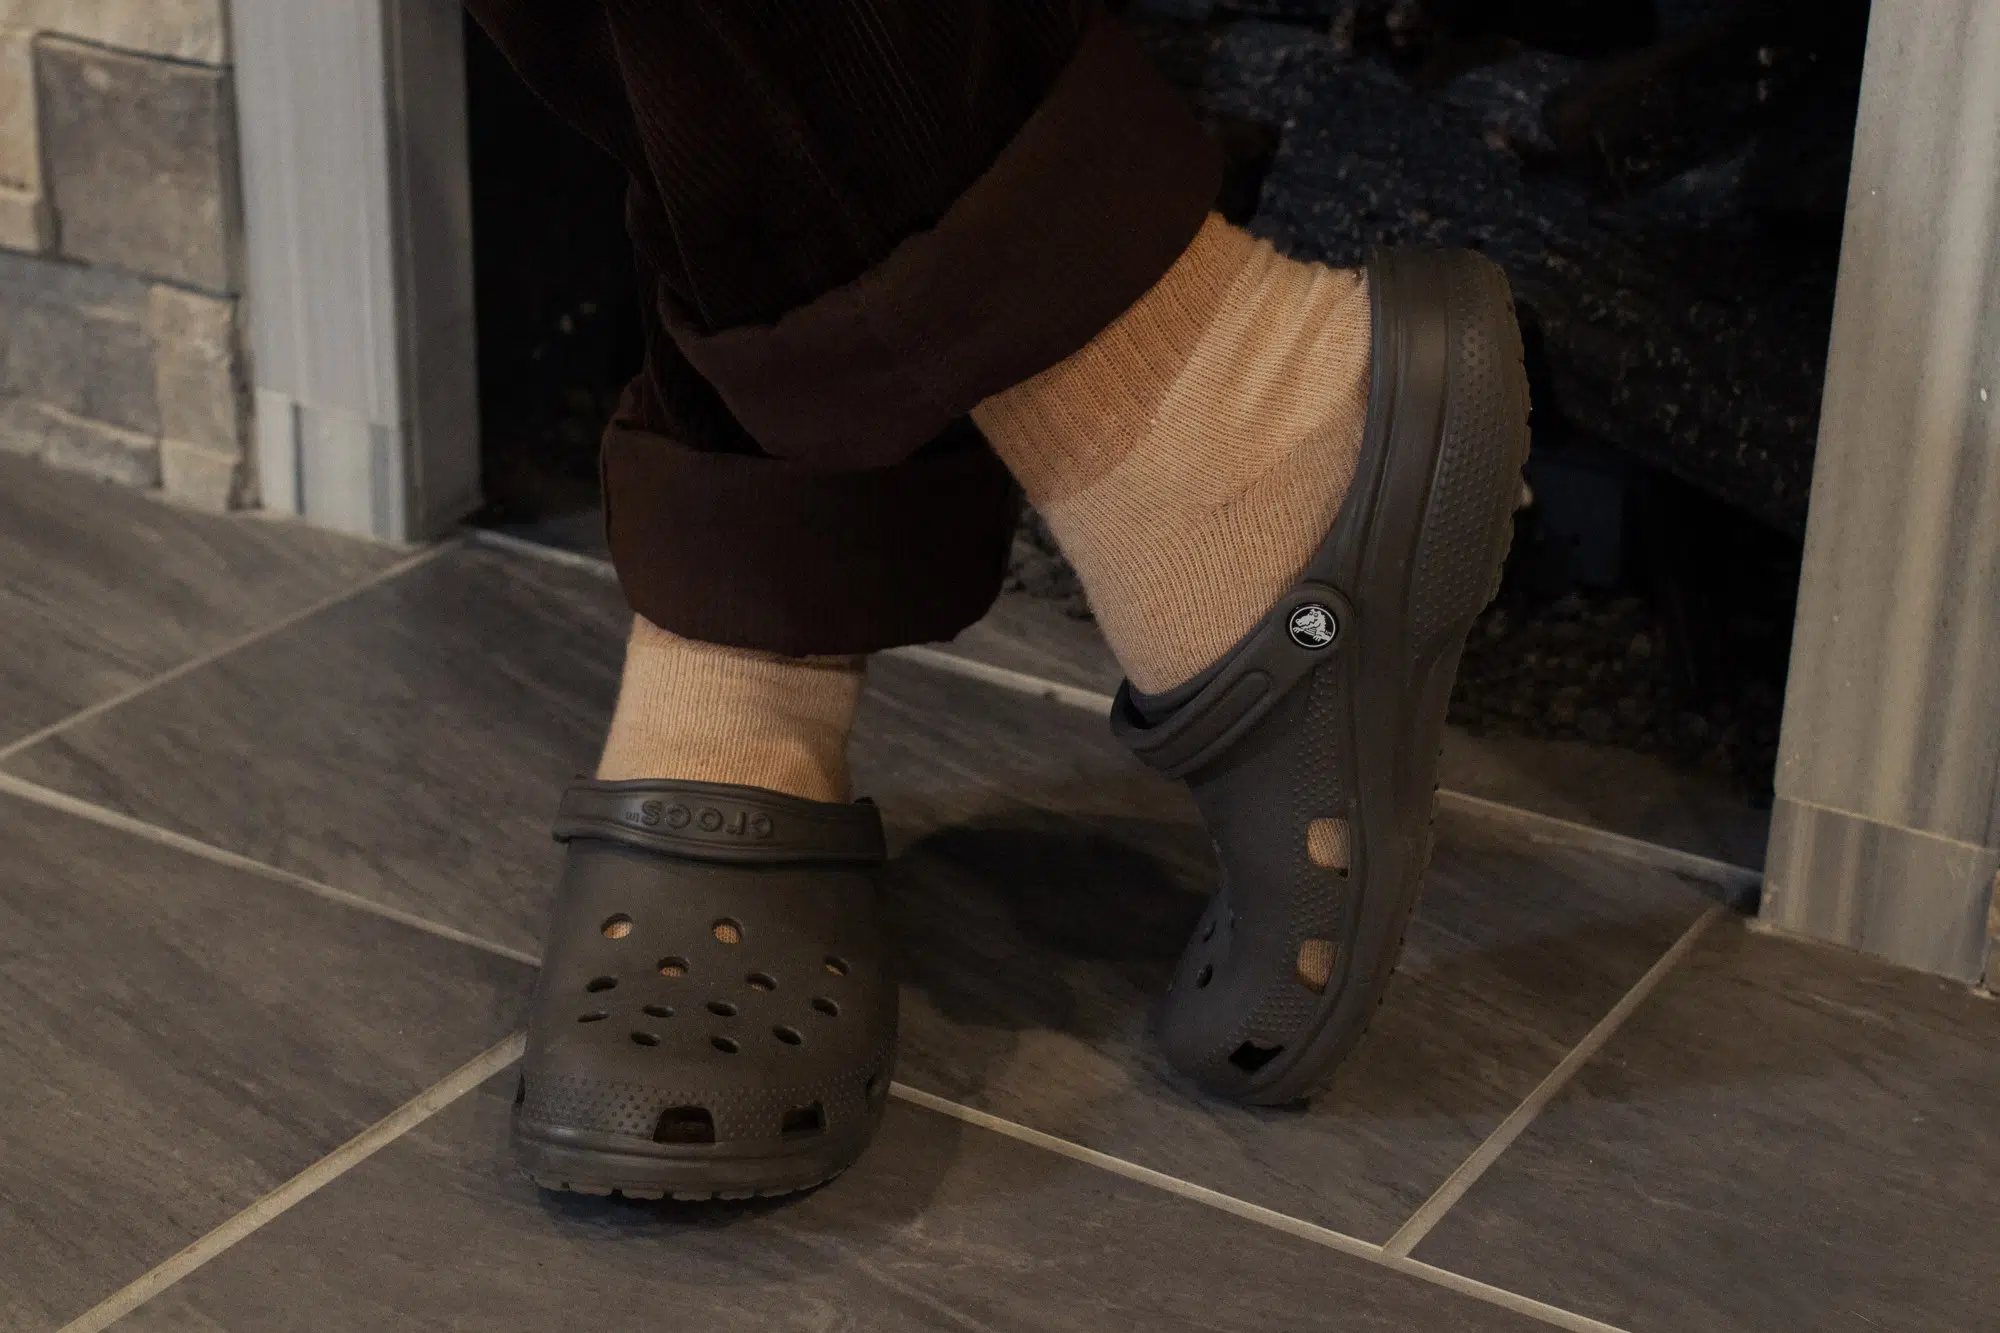 Crocs with straps up top